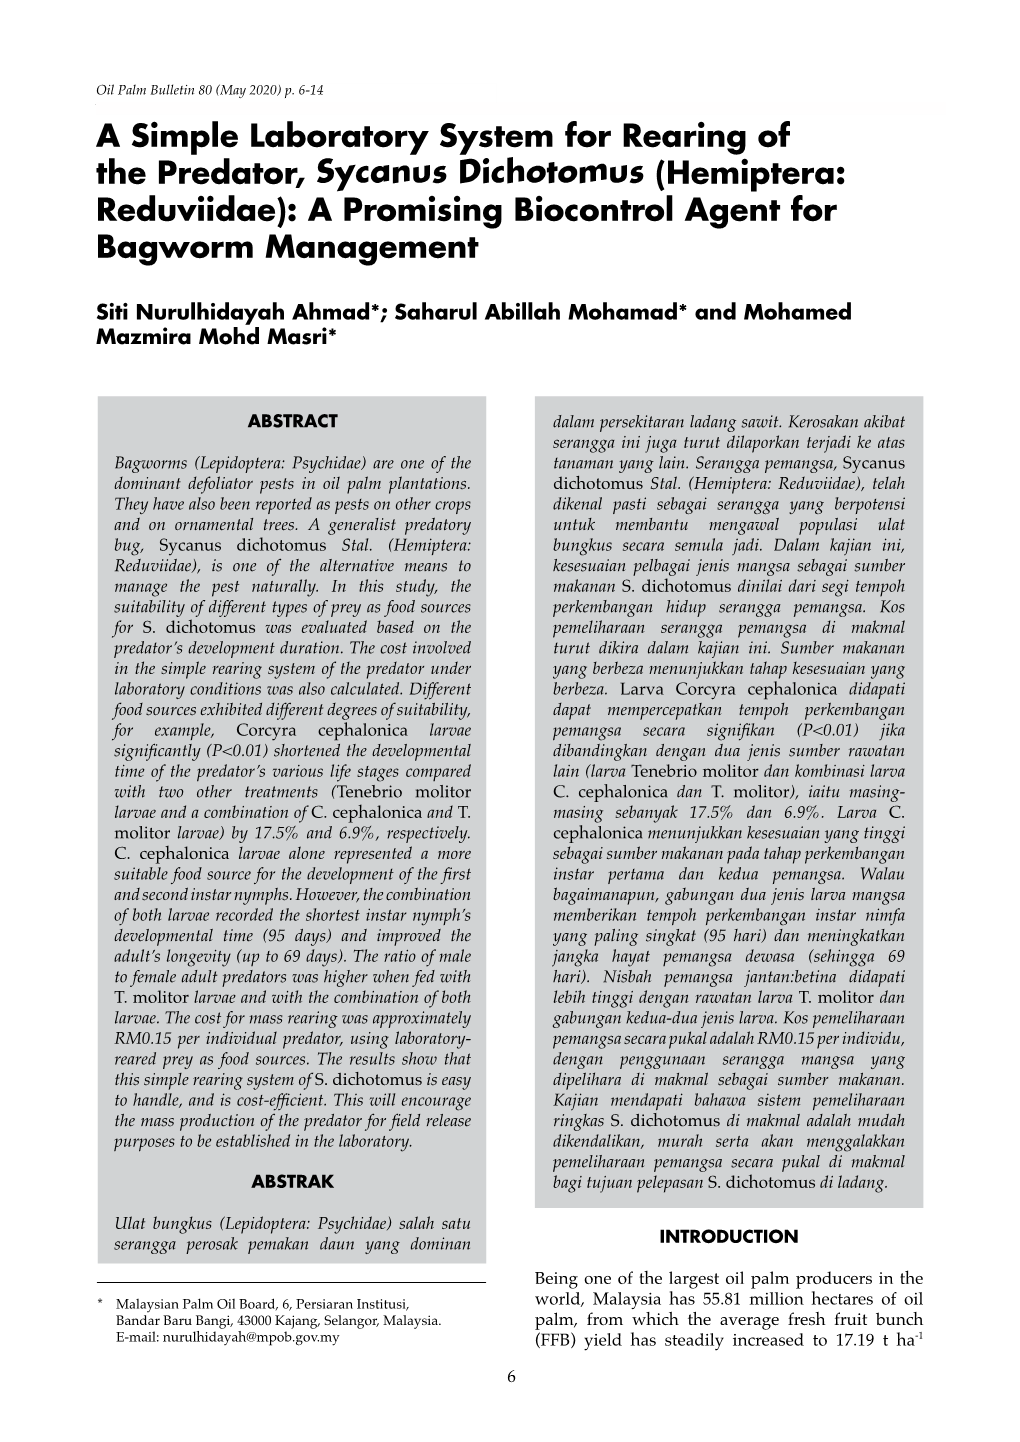 A Simple Laboratory System for Rearing of the Predator, Sycanus Dichotomus (Hemiptera: Reduviidae): a Promising Biocontrol Agent for Bagworm Management